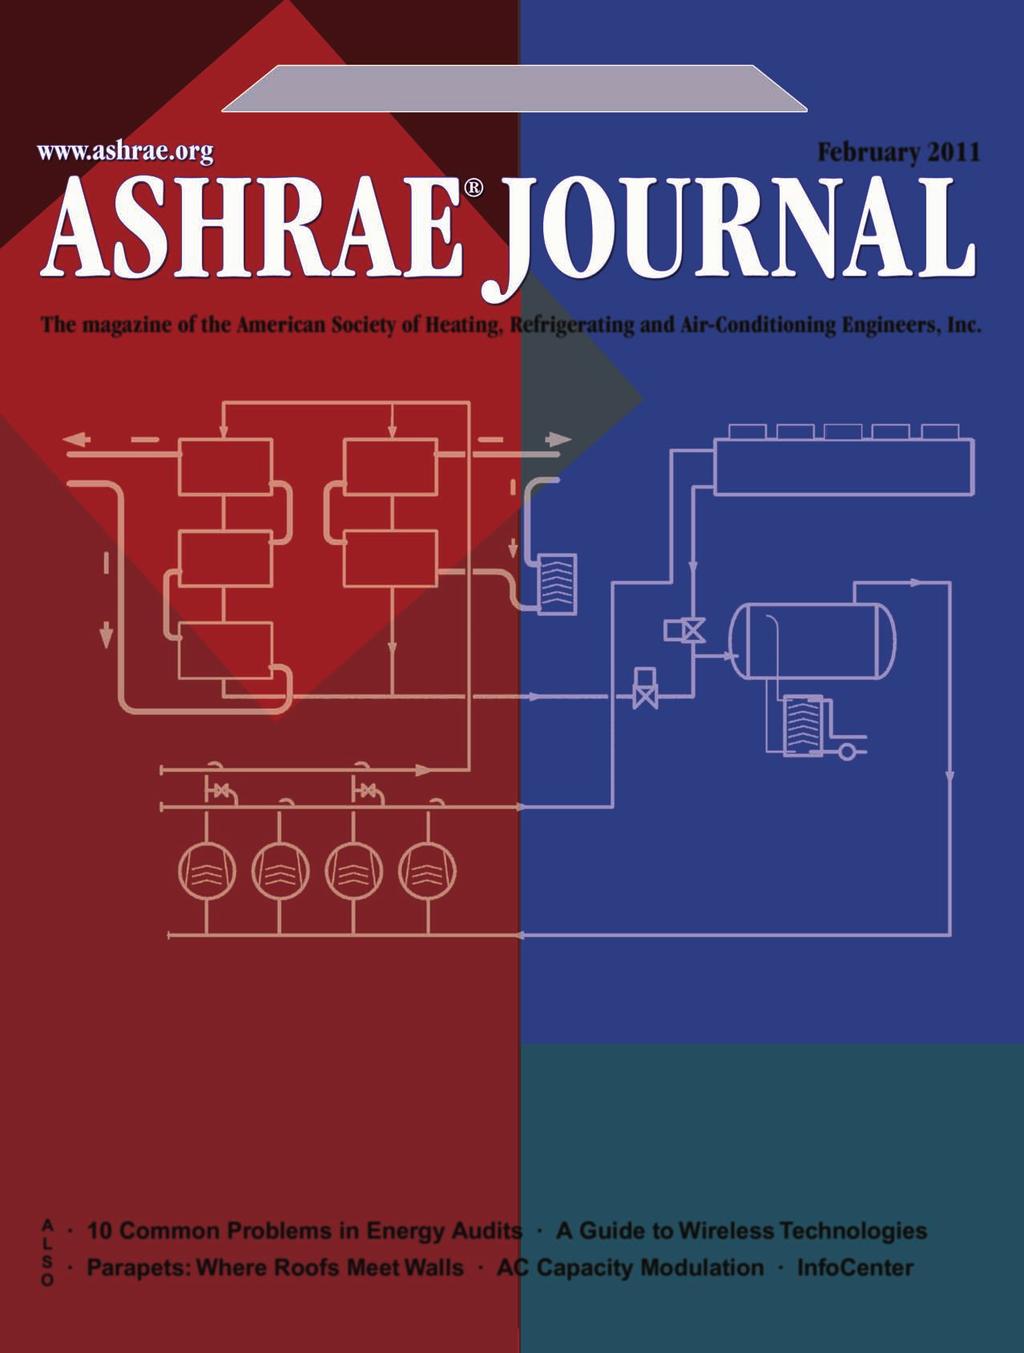 This article was published in ASHRAE Journal, February 2011. Copyright 2011 American Society of Heating, Refrigerating and Air-Conditioning Engineers, Inc.